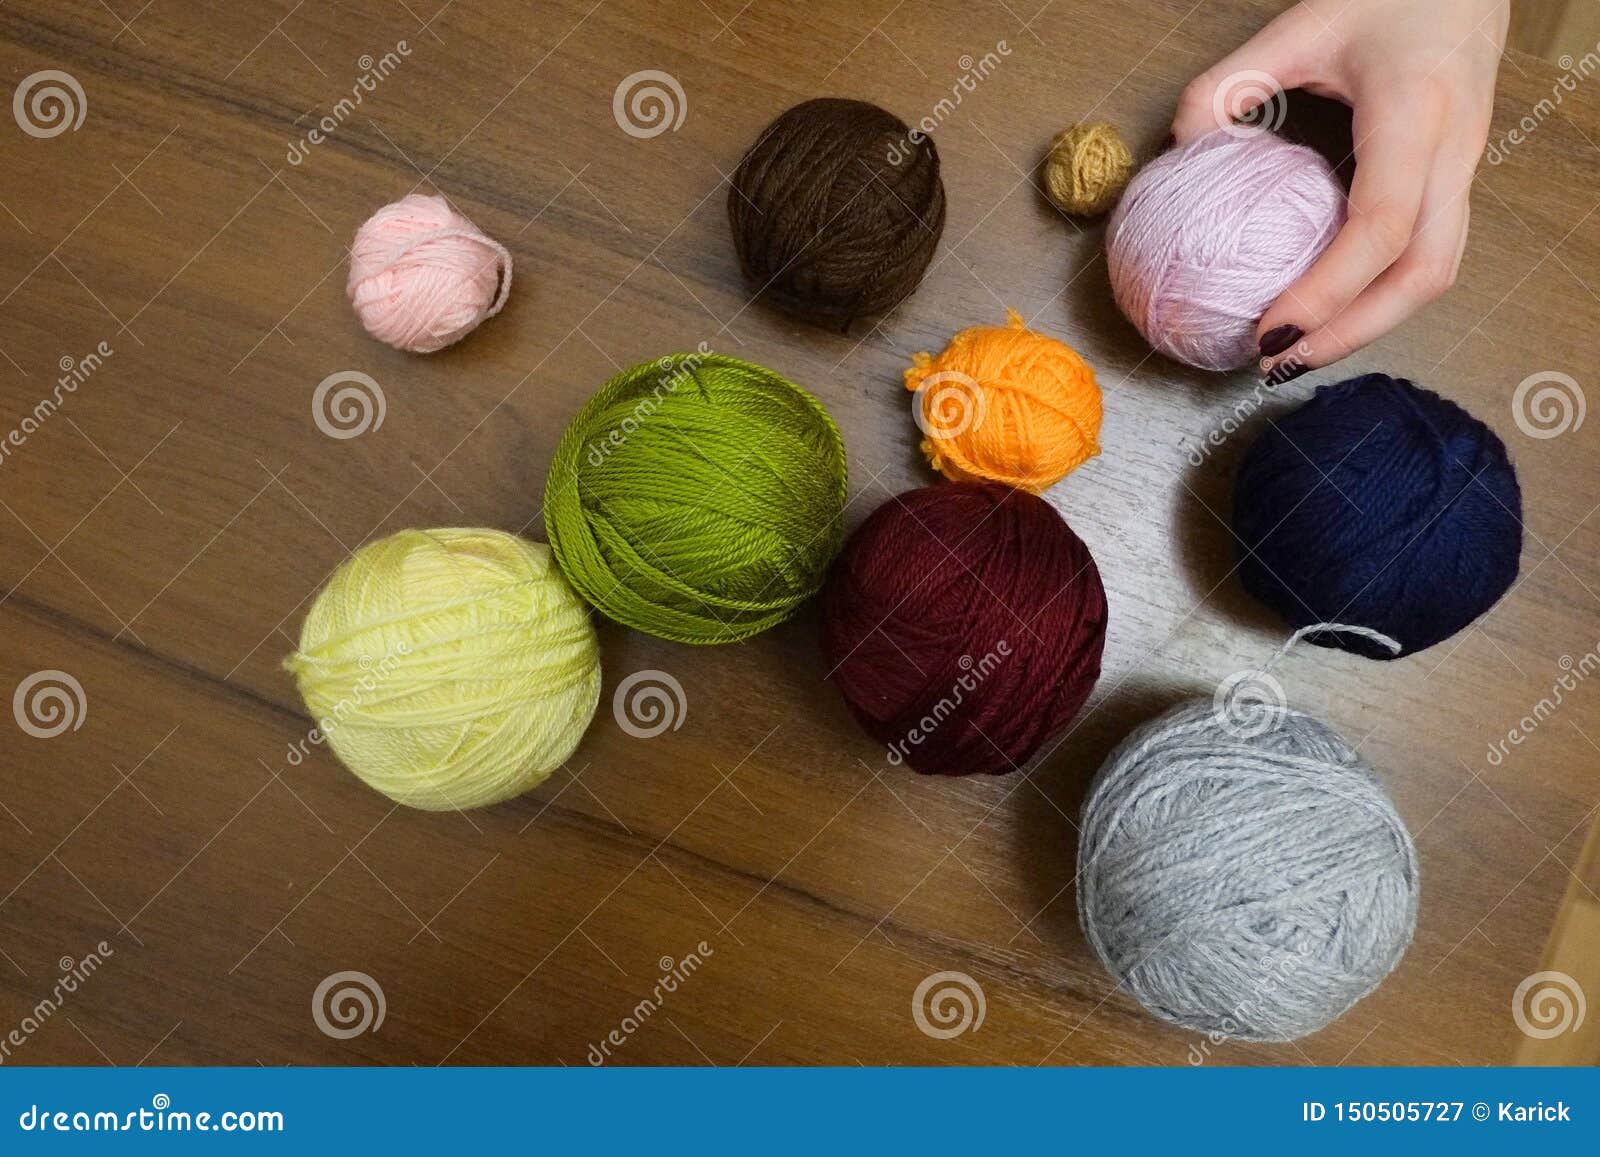 Girl Holding in Hand on of the Crochet Yarn Ball Stock Image - Image of  decor, grey: 150505727